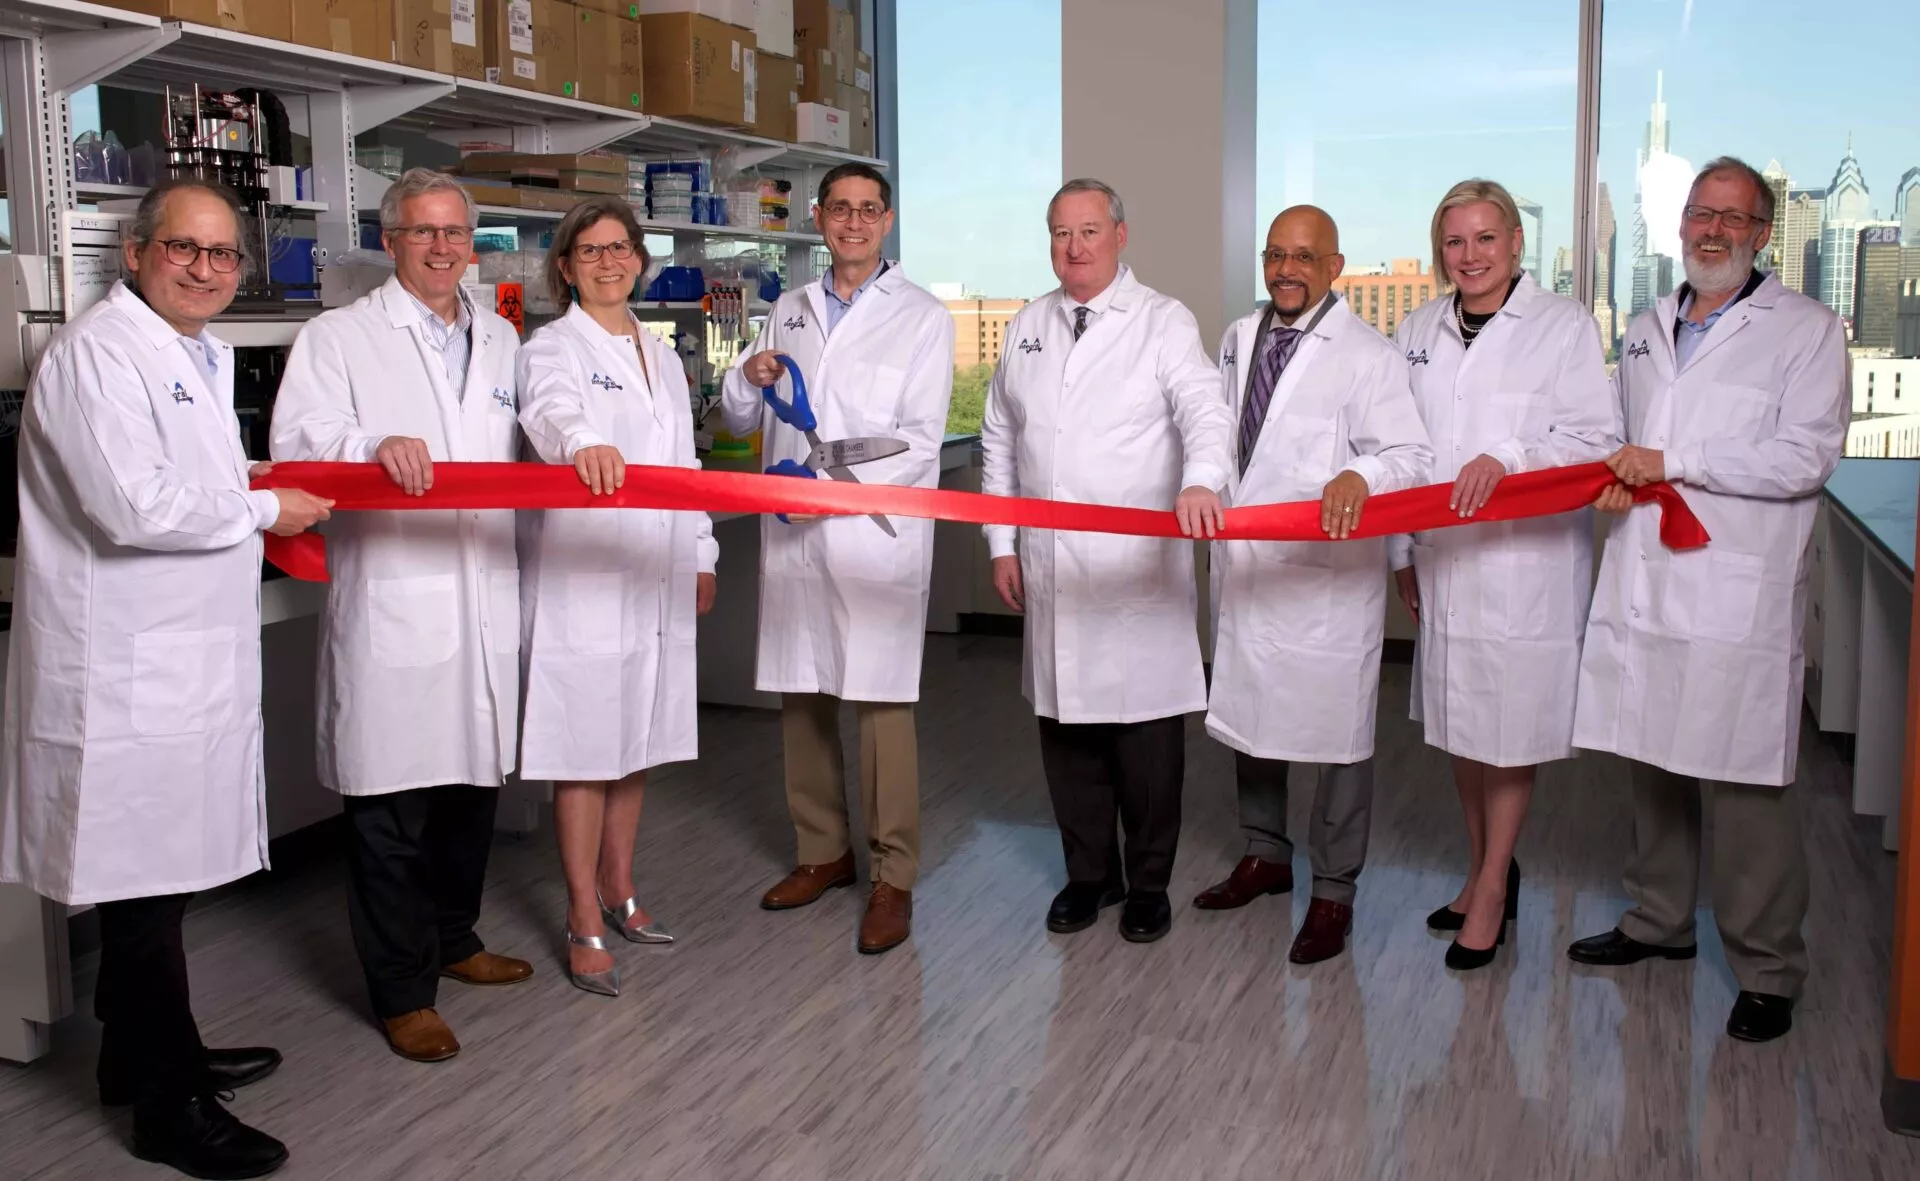 Integral Molecular cuts the ribbon on its new 32,000 SF headquarters and research facility with Senator Vincent Hughes, Mayor Jim Kenney, and development partners Wexford & Science Center